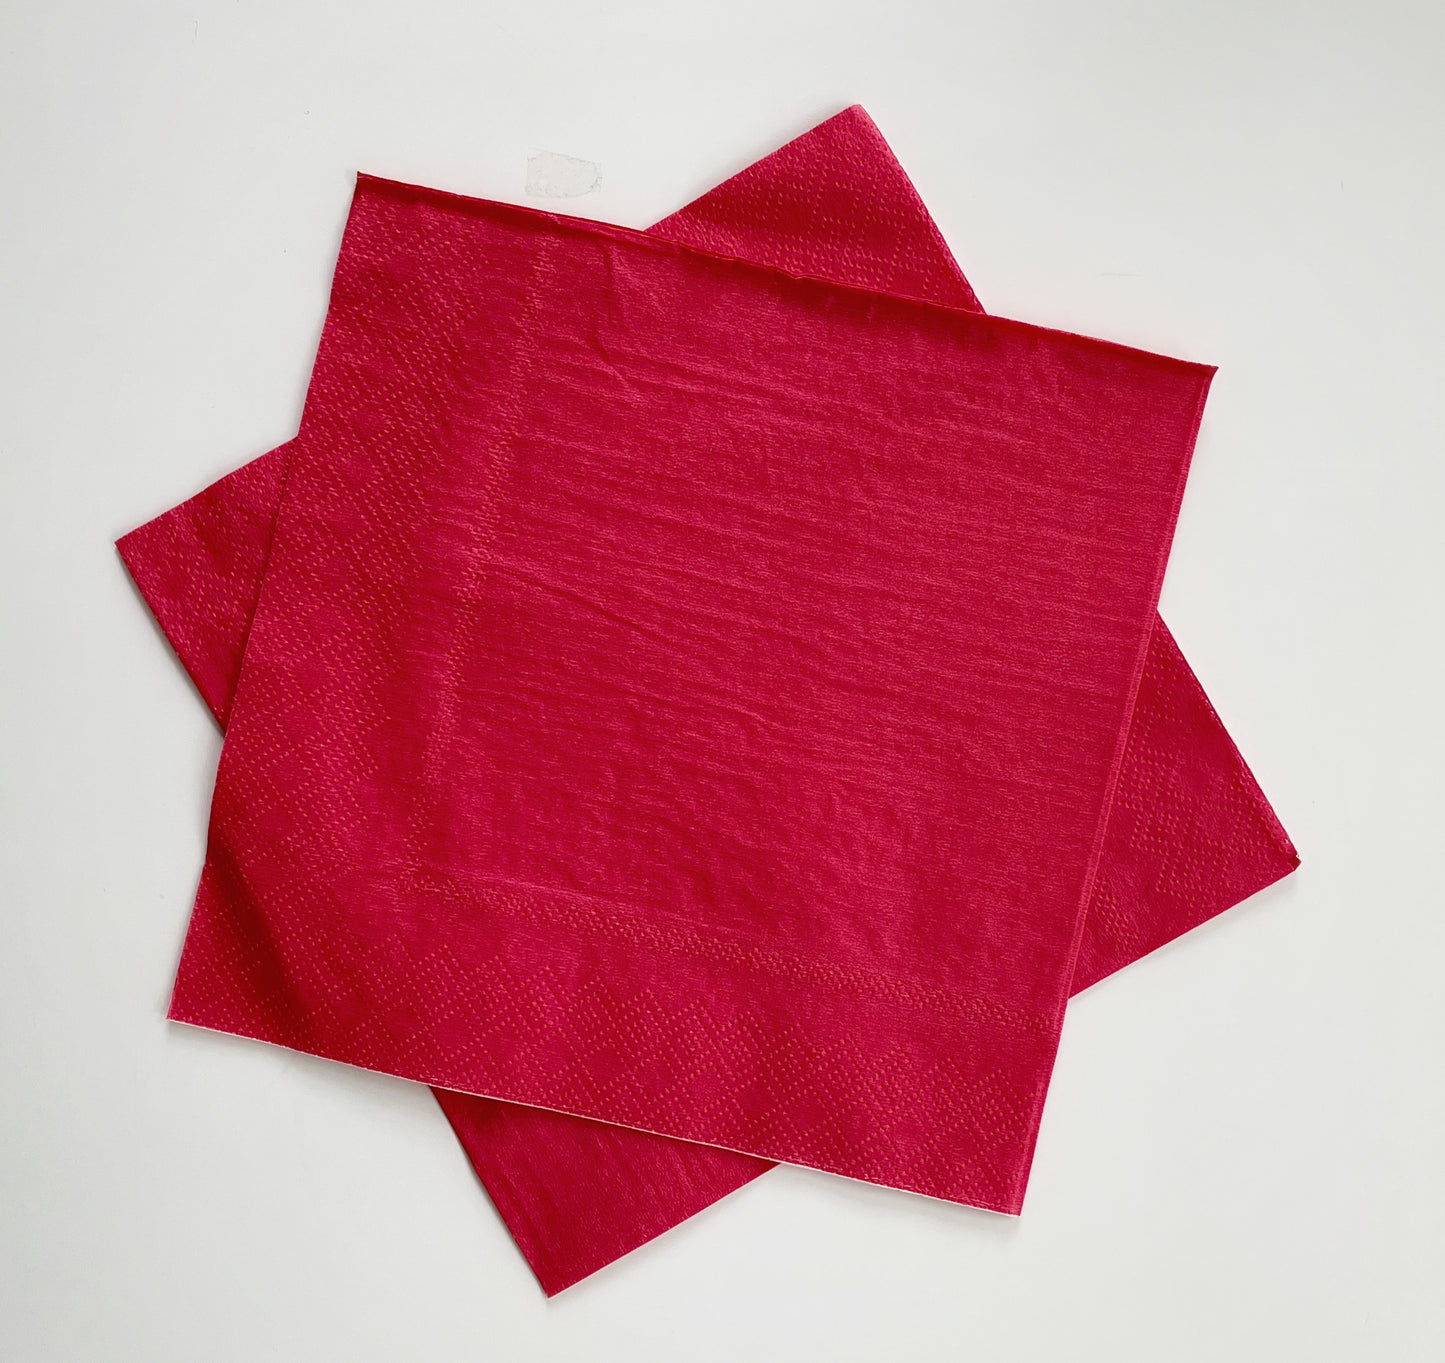 The paper party napkins are a bold red colour.